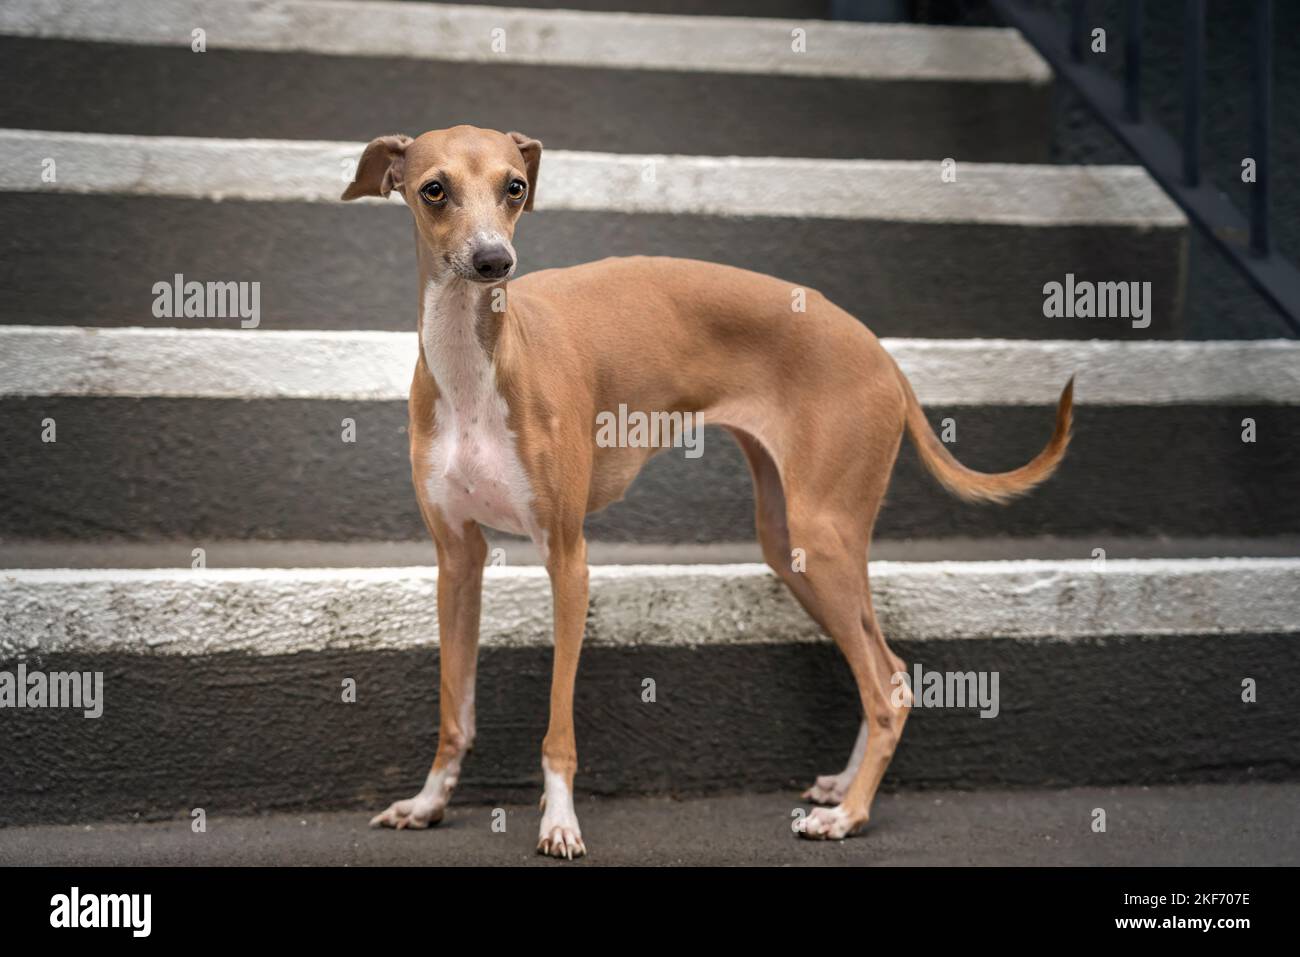 Italian Greyhound - fawn in colour, standing on the stairs and looking directly at the camera Stock Photo